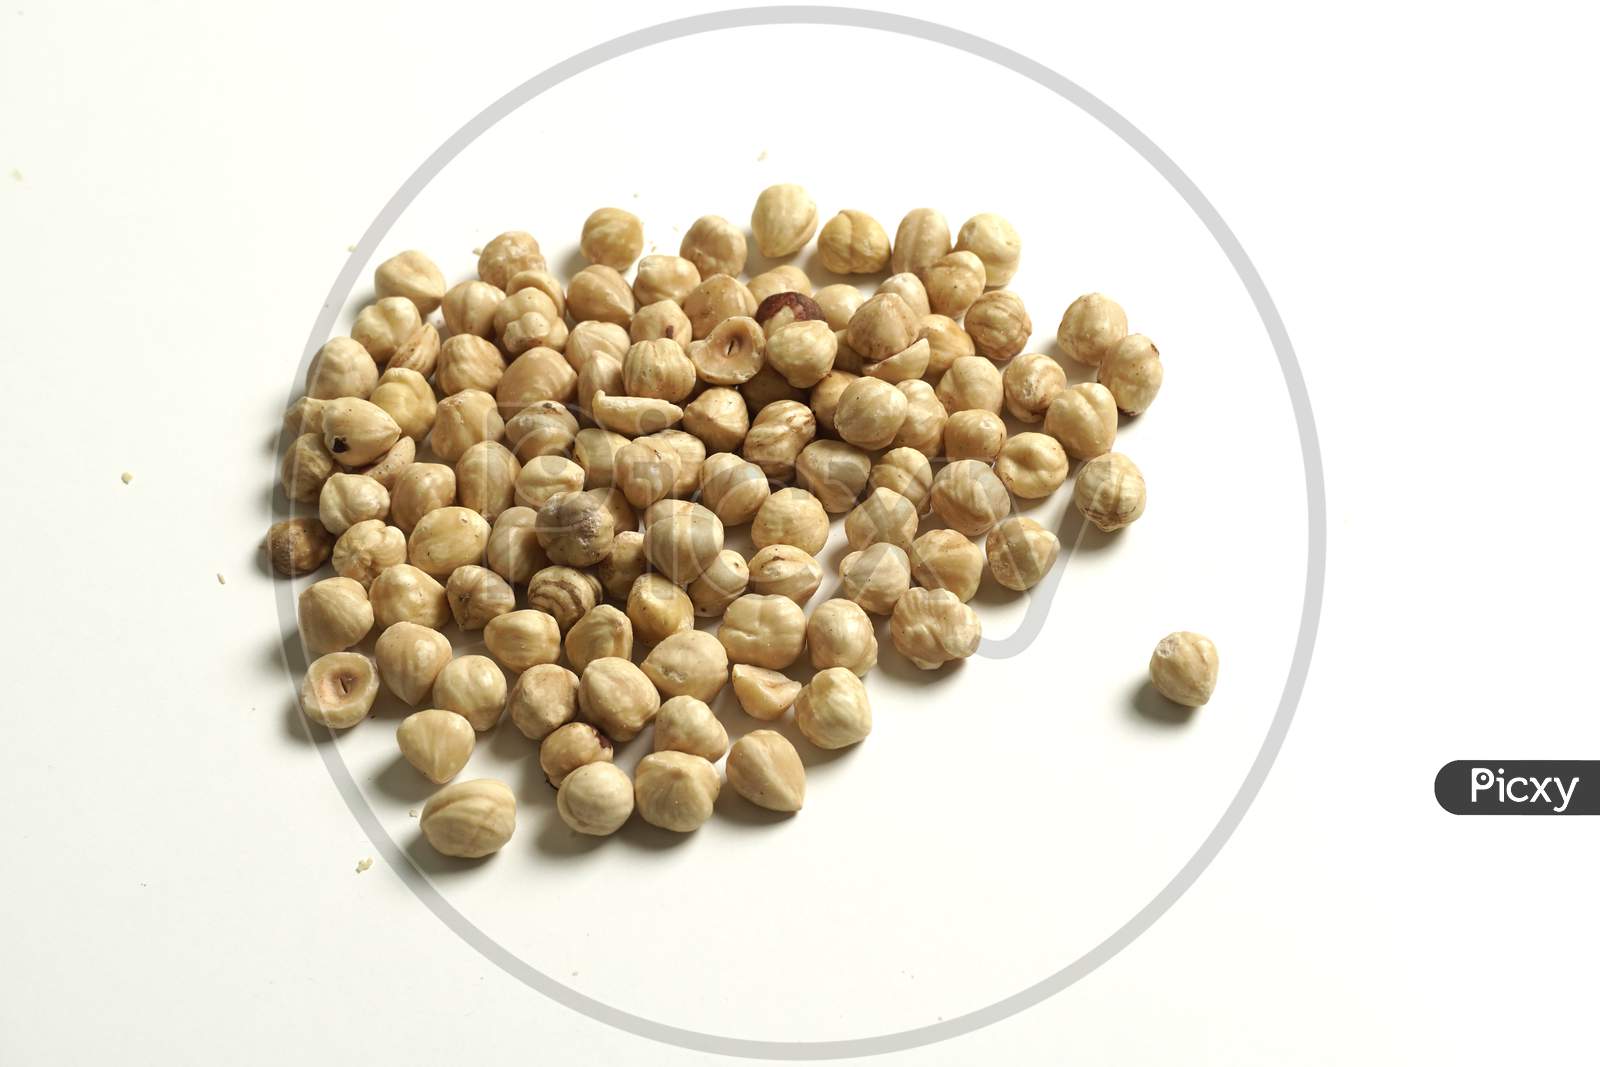 Chickpeas Together On A White Background With Copy Space